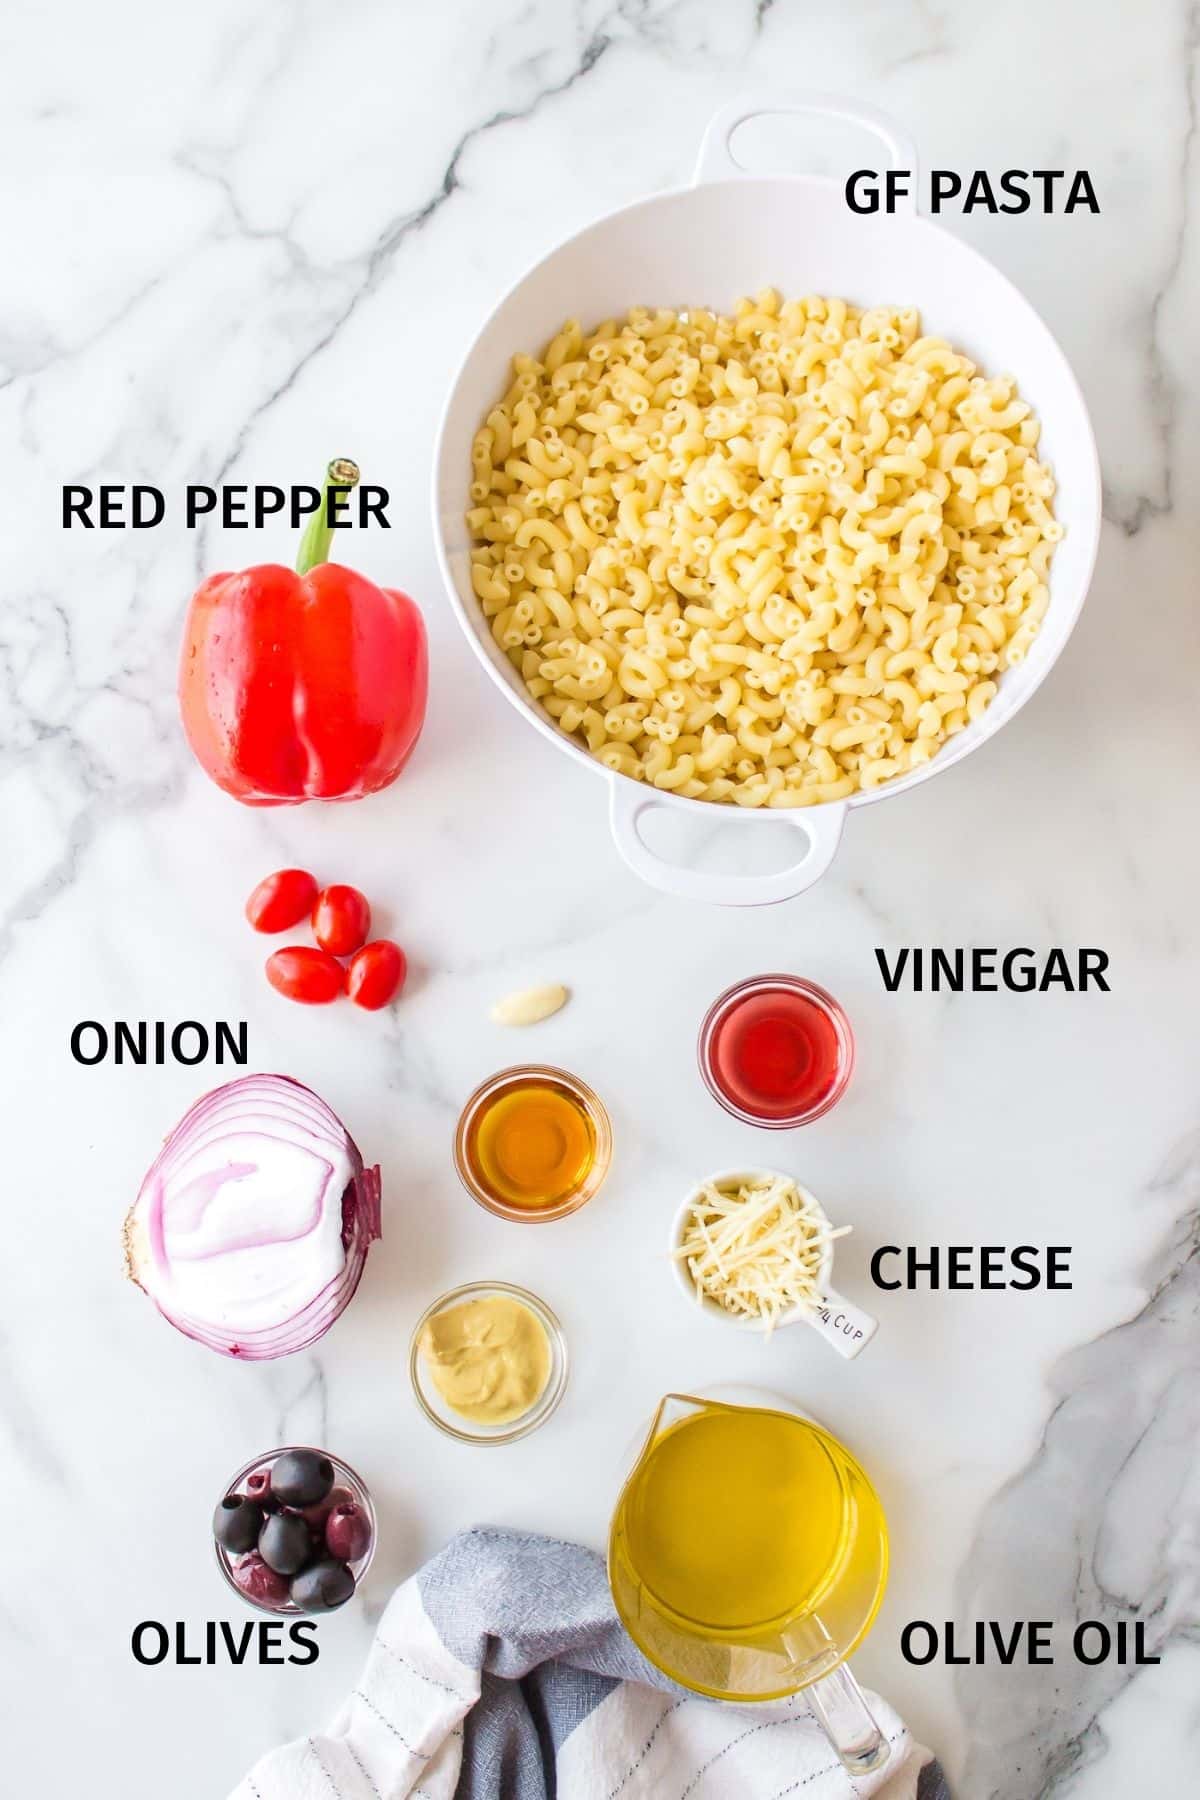 Ingredients for pasta salad in small bowls on a white surface.